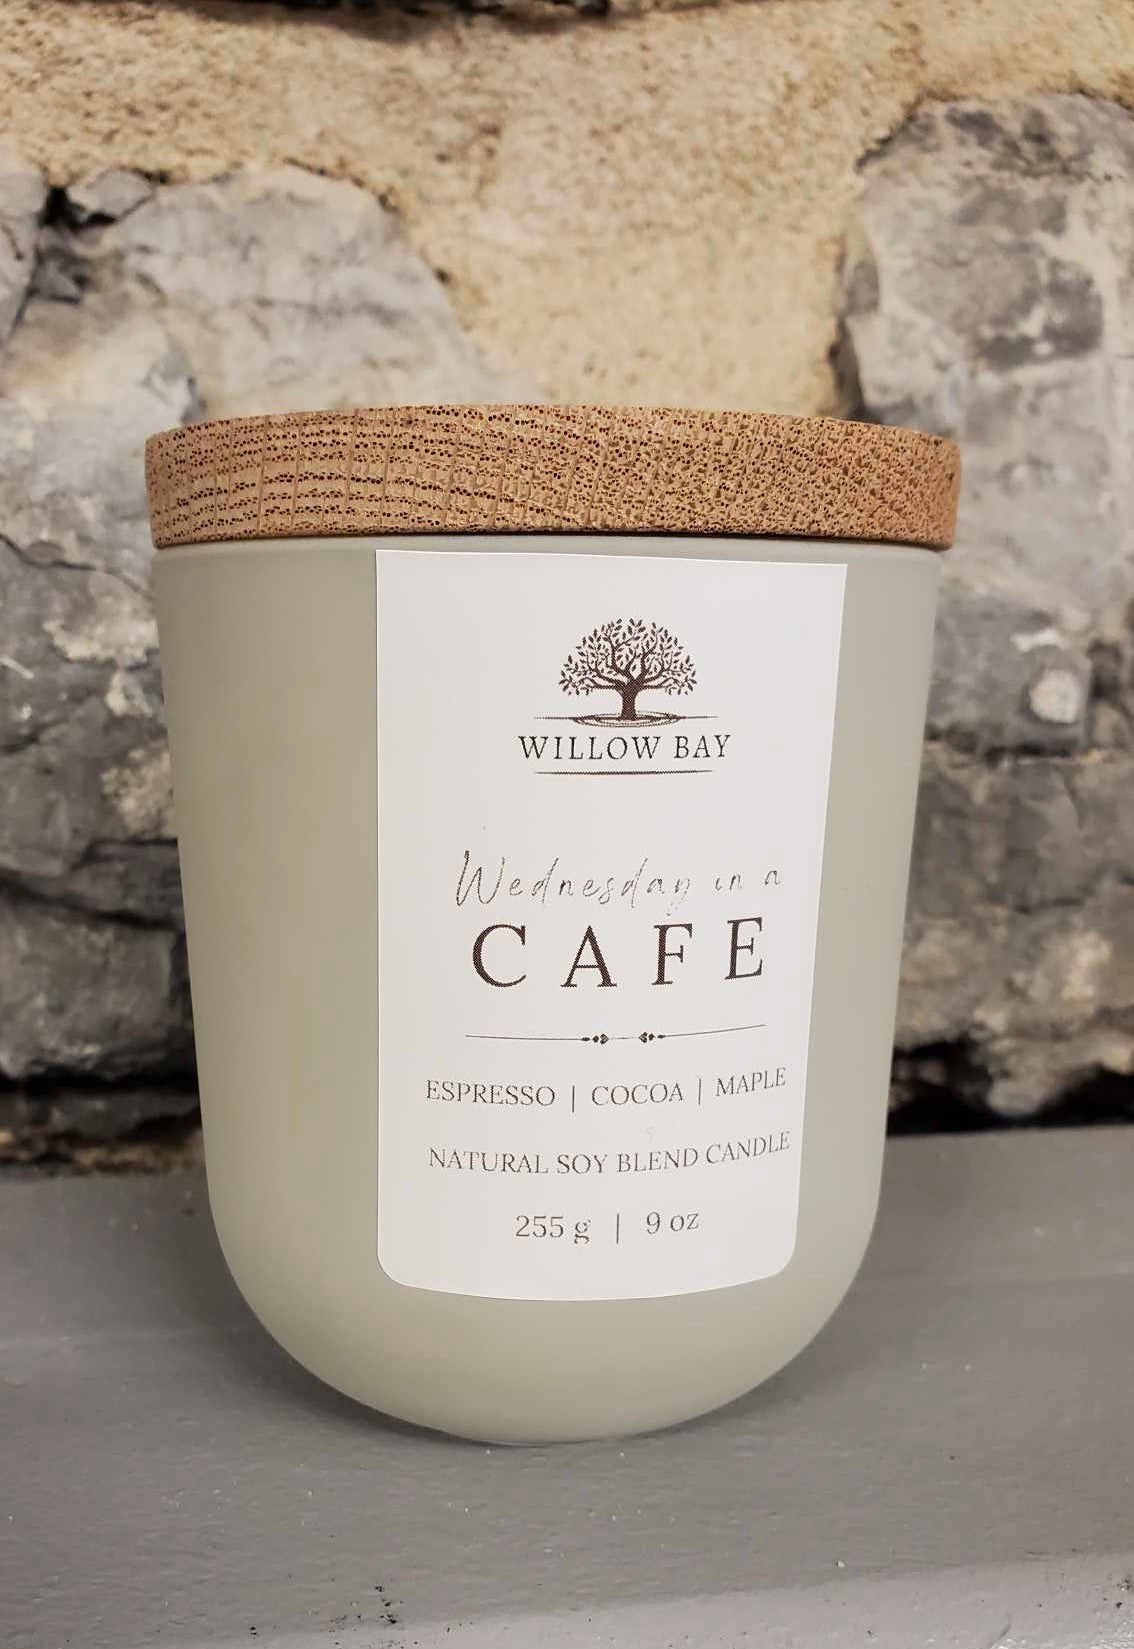 Wednesday in a cafe 9 oz Candle